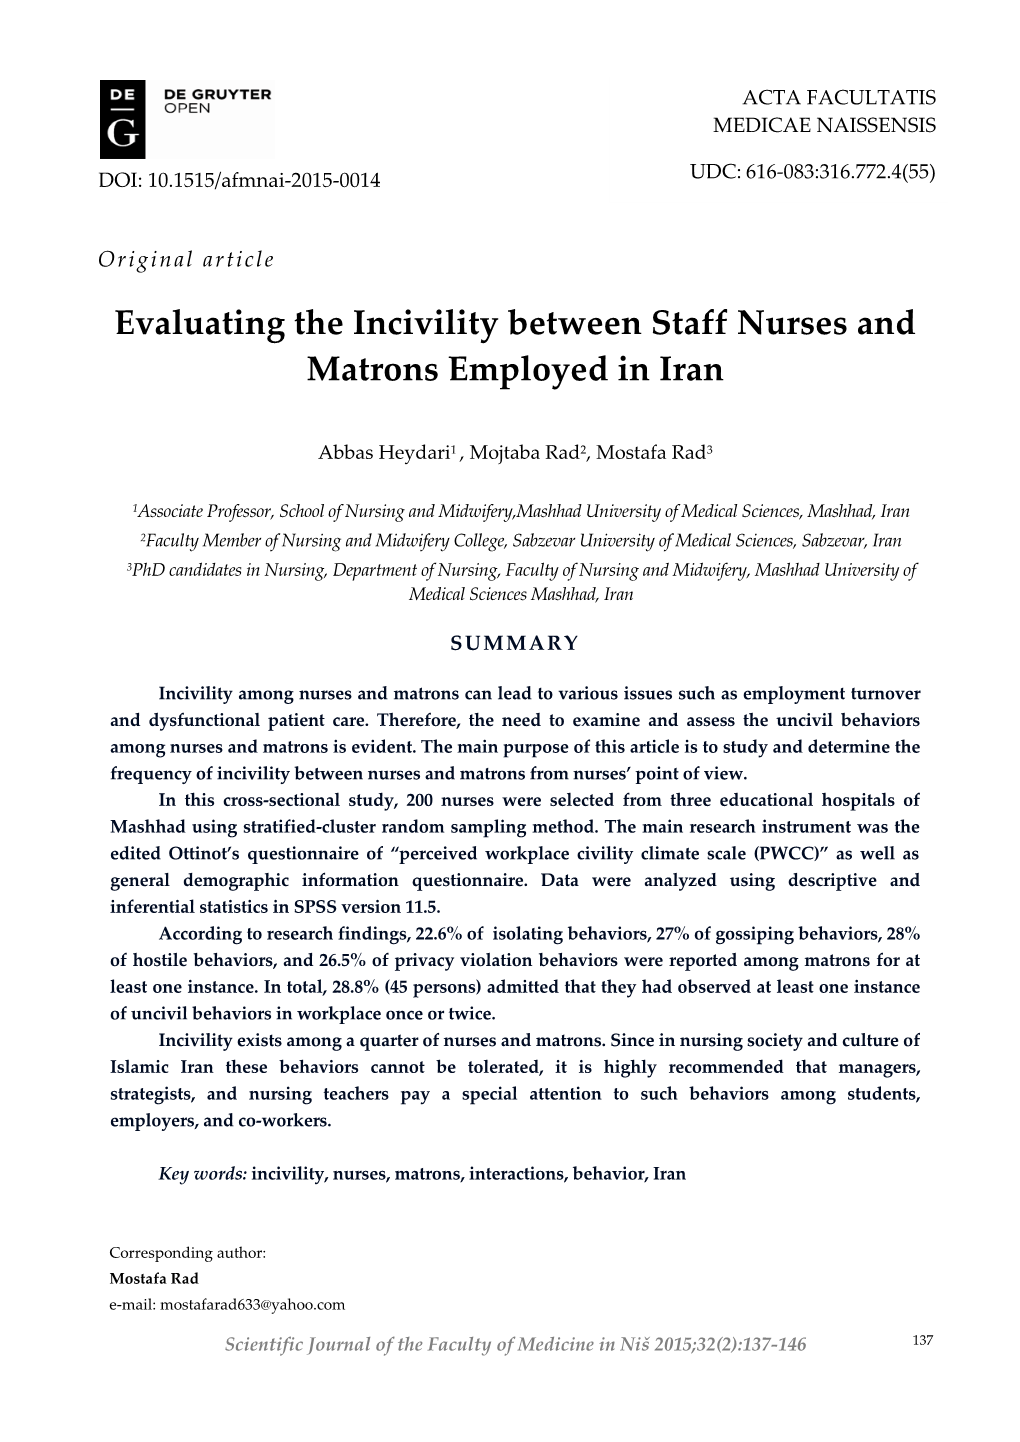 Evaluating the Incivility Between Staff Nurses and Matrons Employed in Iran